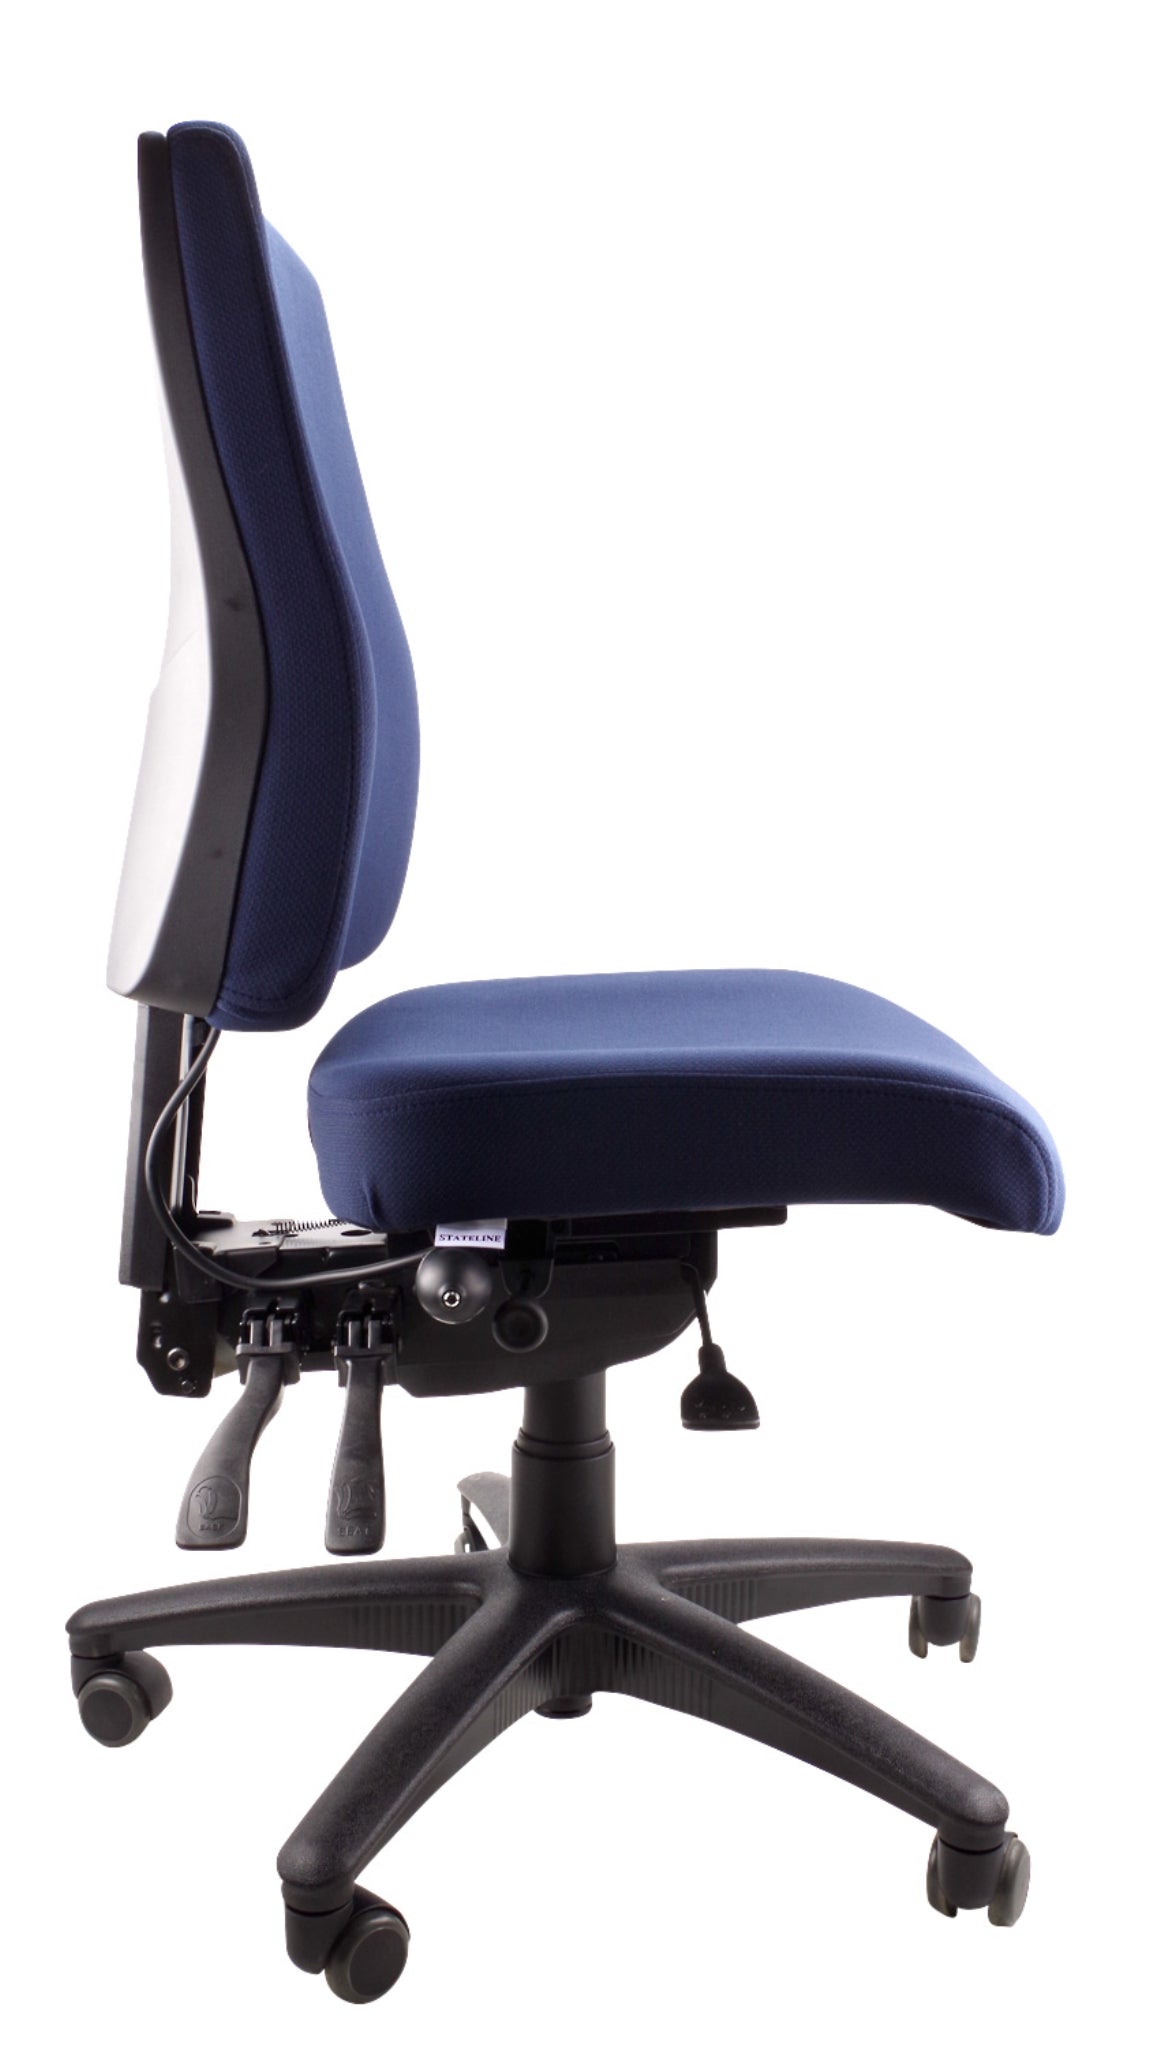 Buy Quality Ergo Air Ergonomic Office Desk Chair Now with FREE SHIPPING Navy